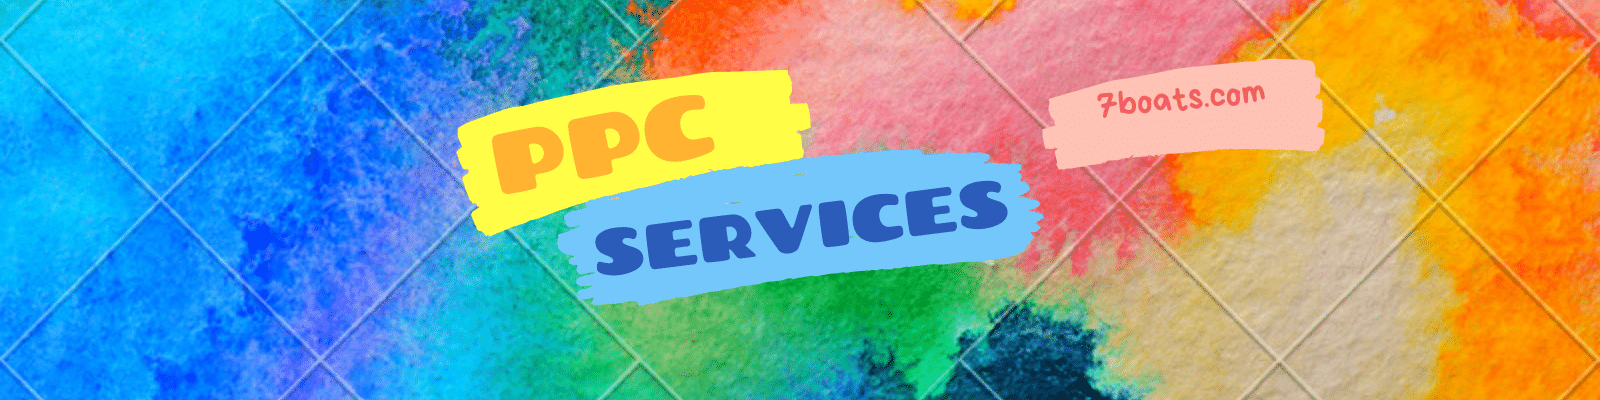 PPC Services by 7boats